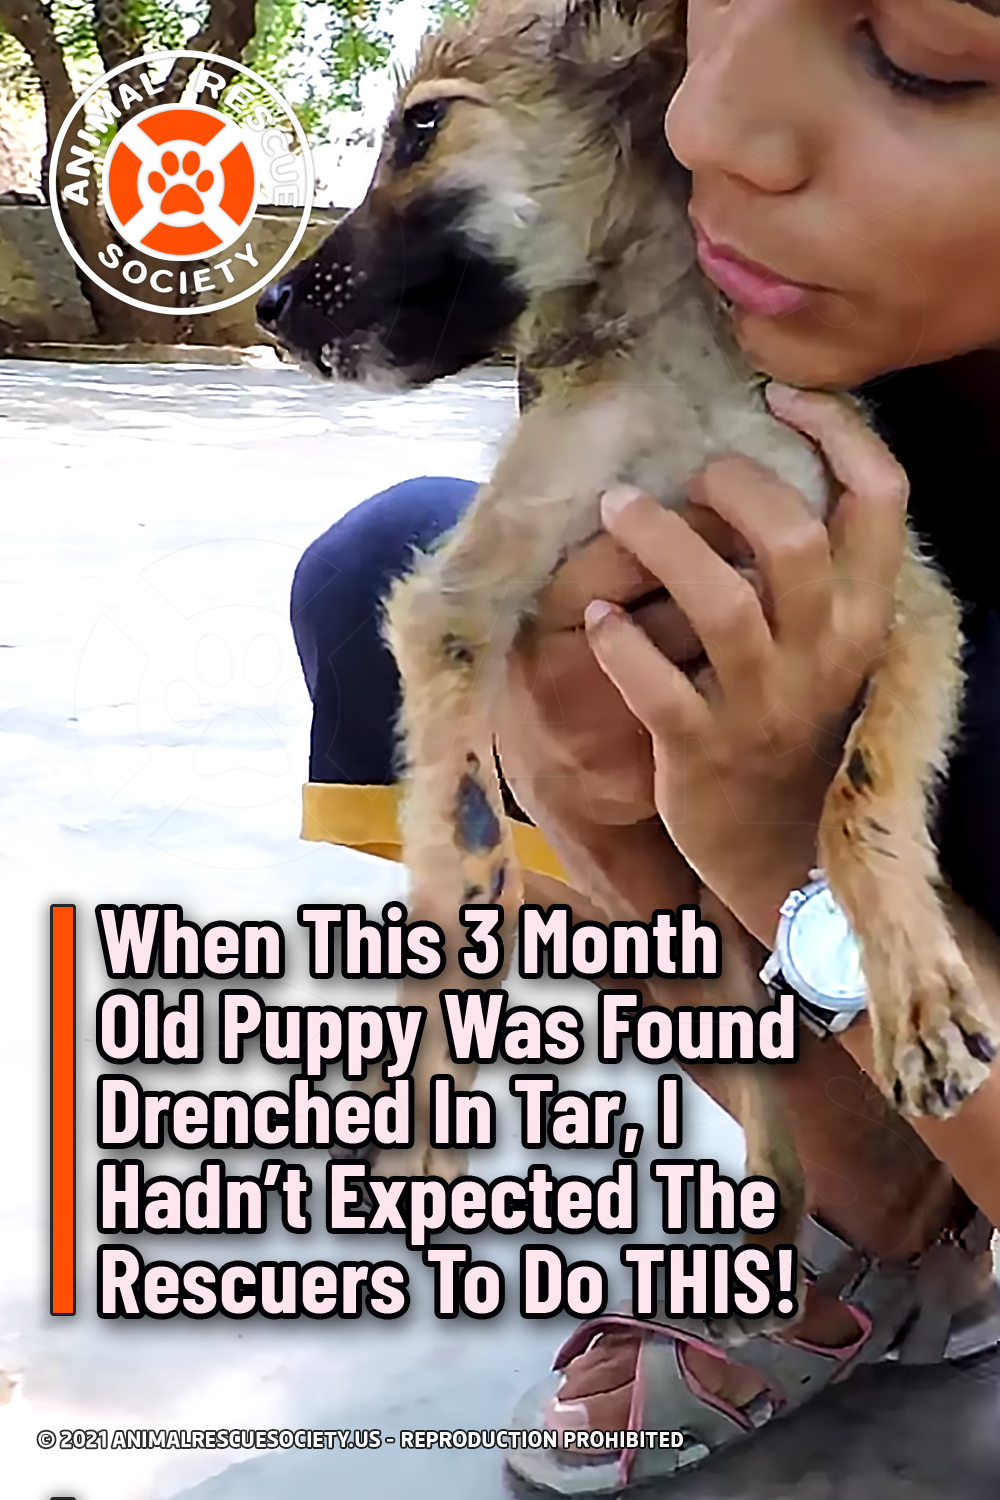 When This 3 Month Old Puppy Was Found Drenched In Tar, I Hadn’t Expected The Rescuers To Do THIS!